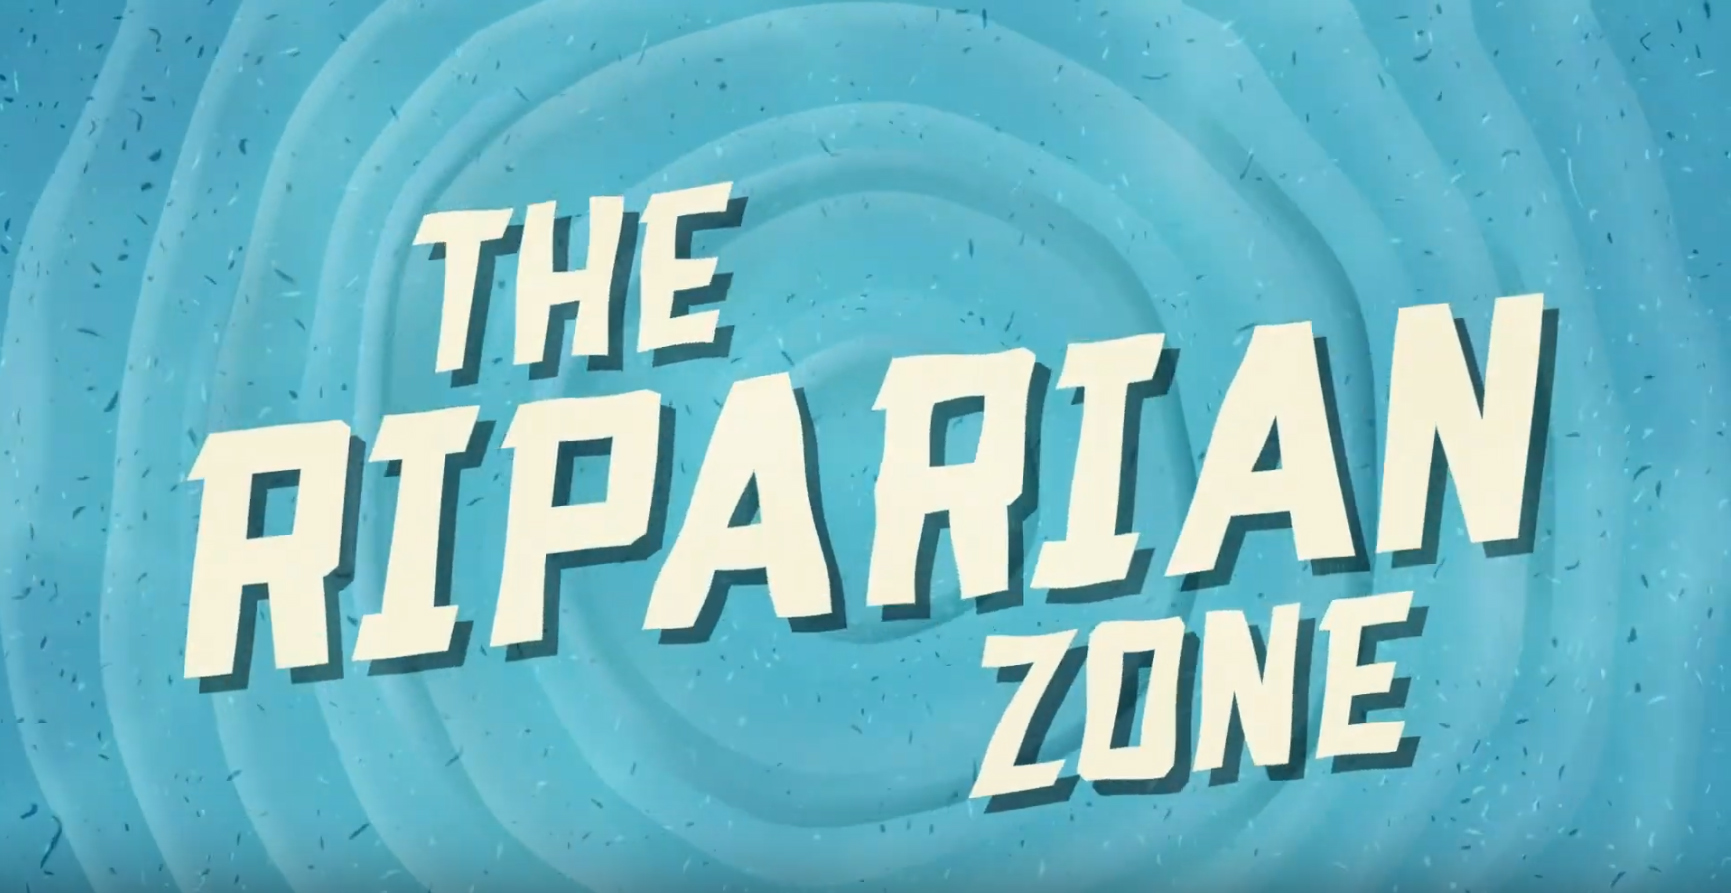 Welcome to the Riparian Zone